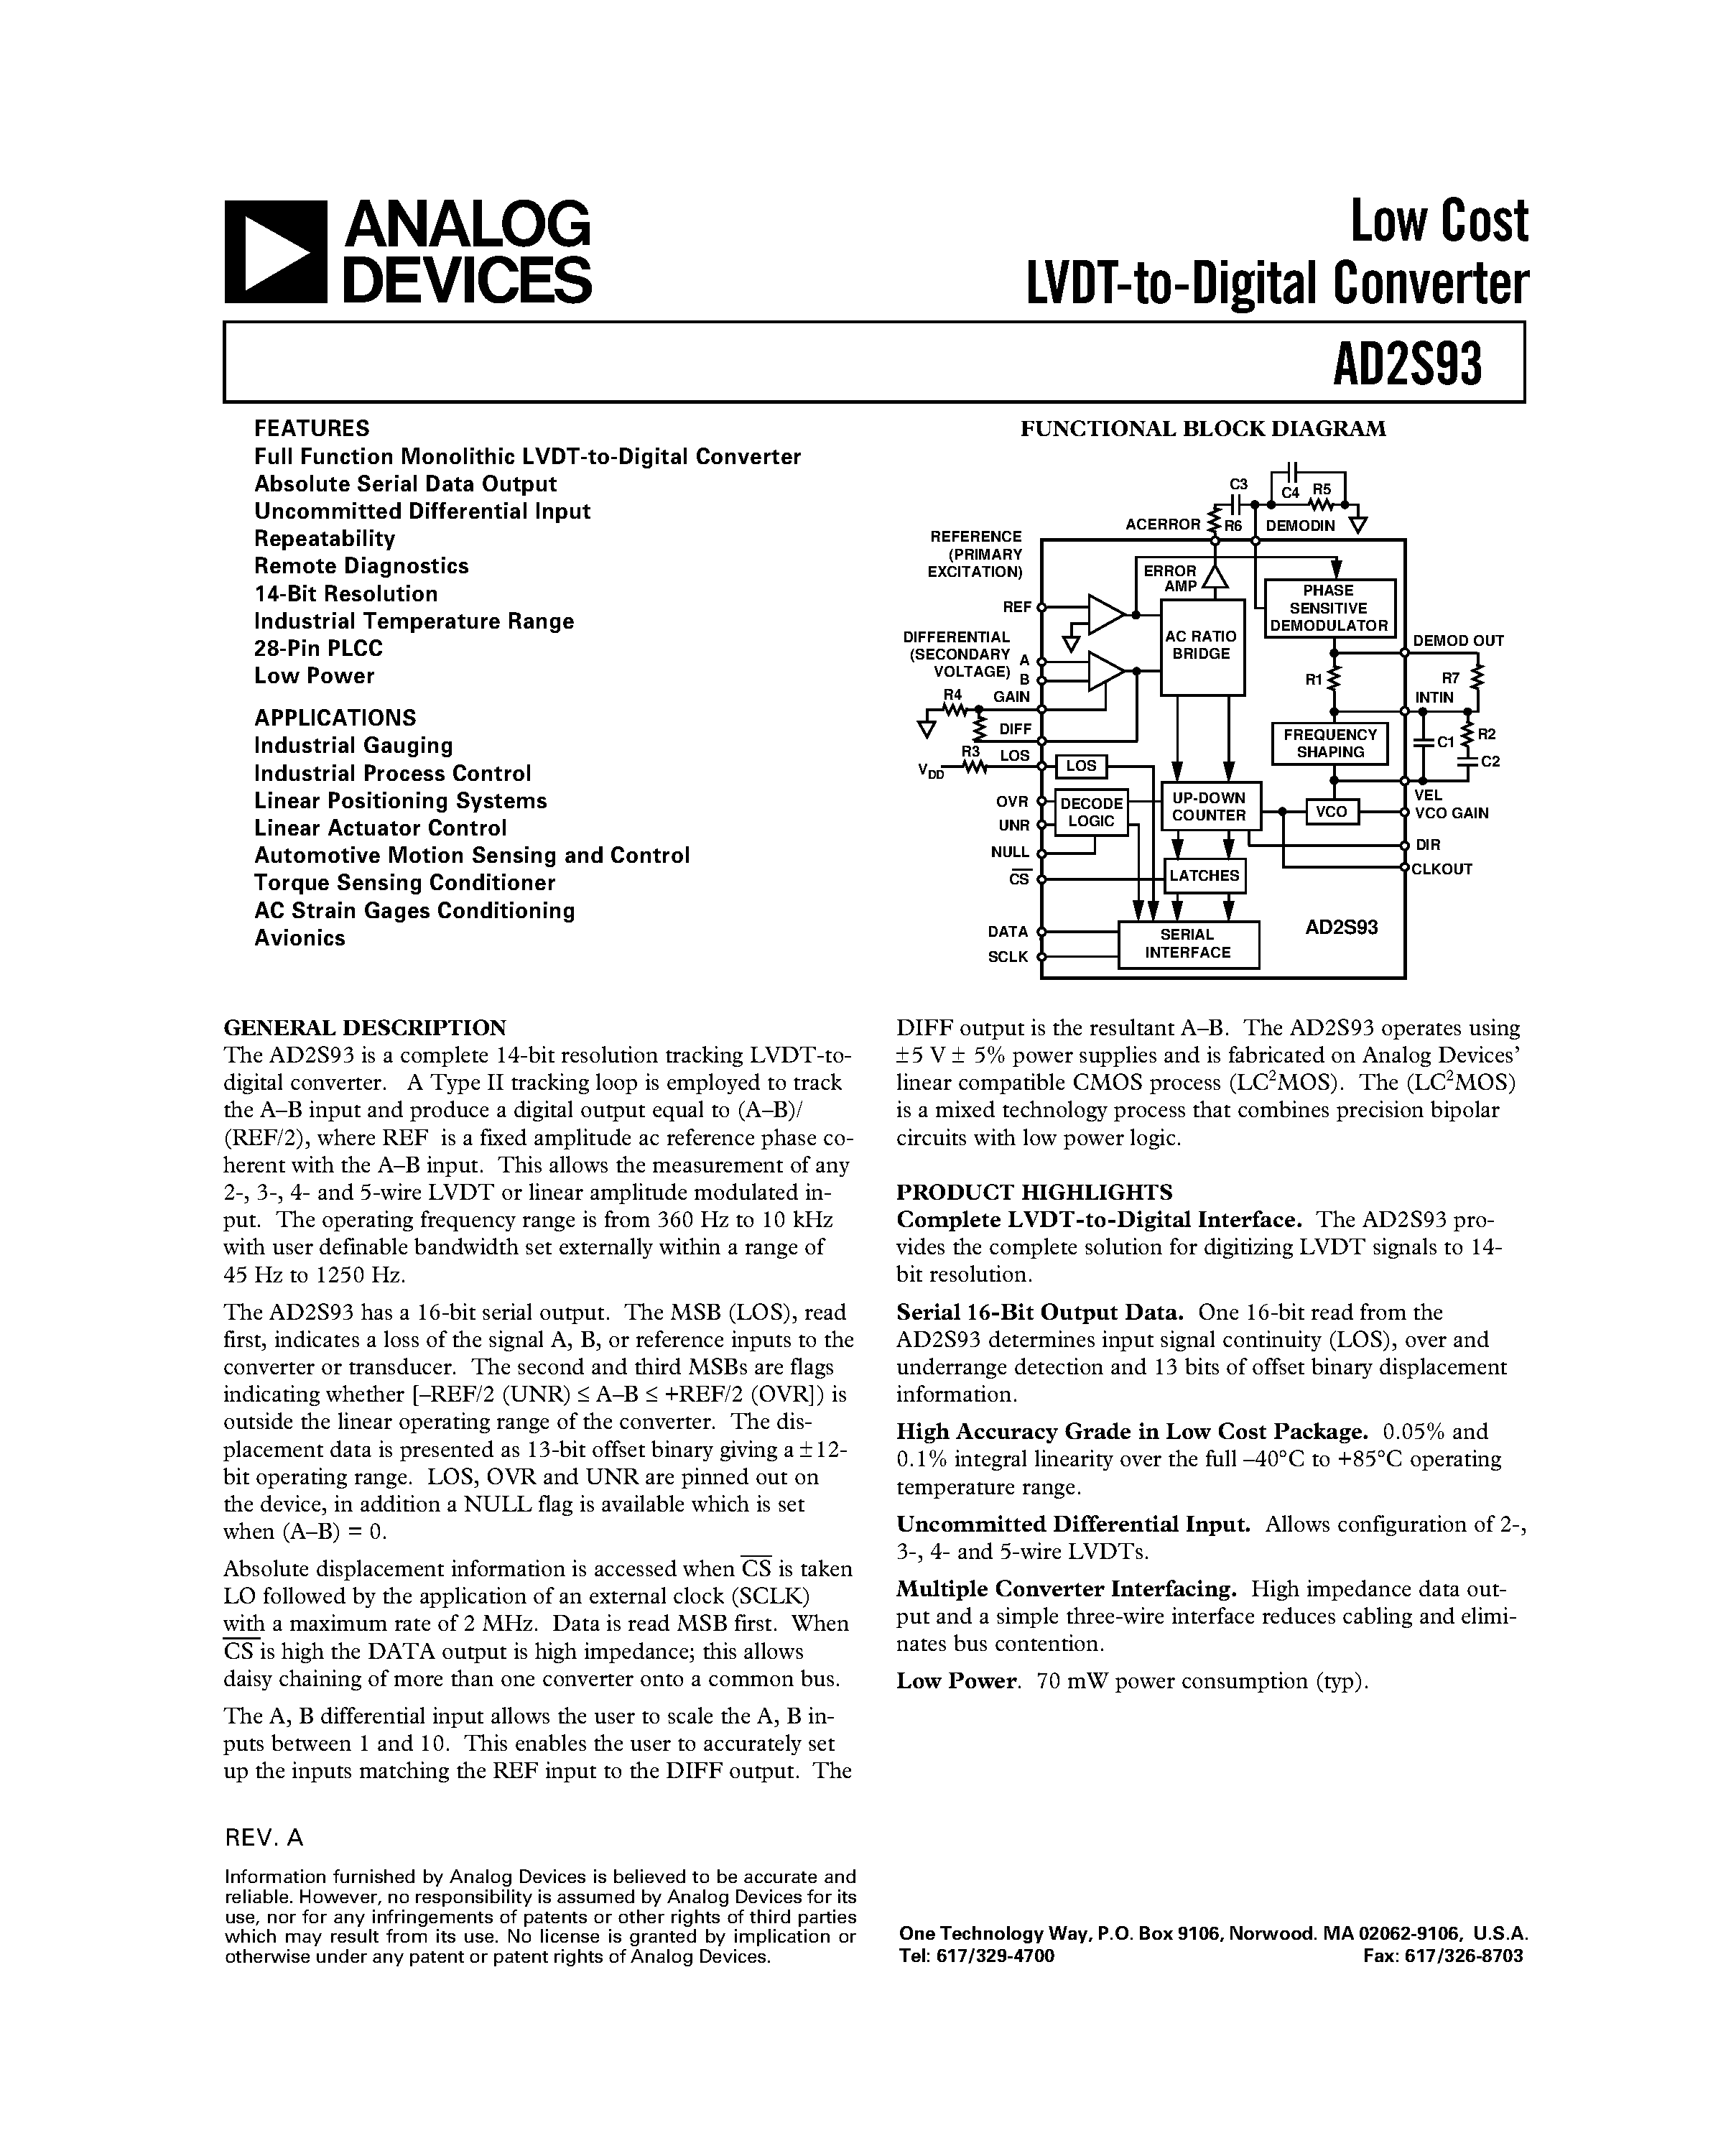 Даташит AD2S93 - Low Cost LVDT-to-Digital Converter страница 1